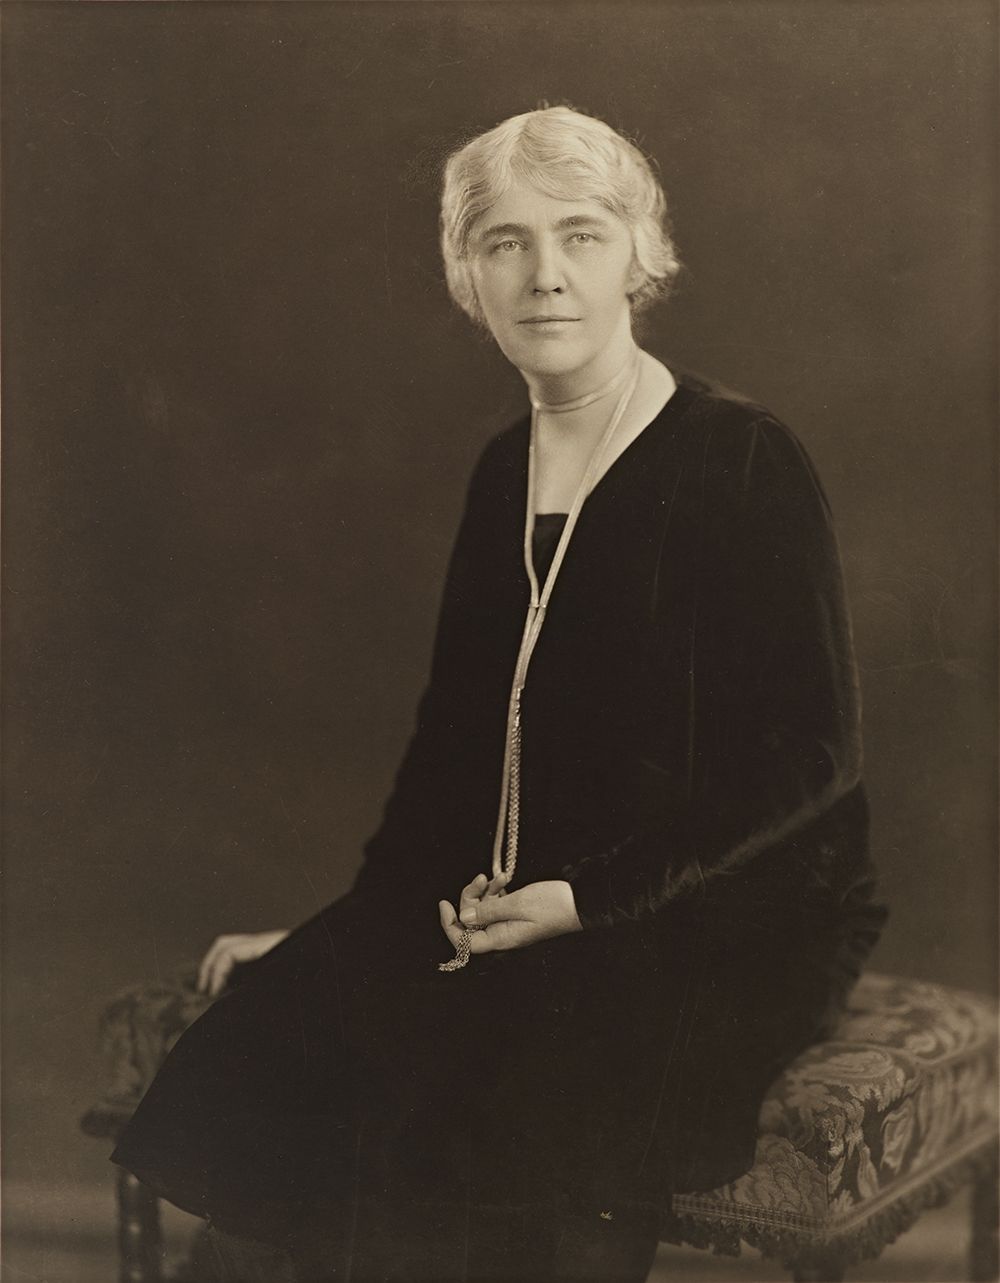 Black and white photograph of Lou Henry Hoover circa 1928. Berton W. Crandall Photographs, Hoover Institution Archives